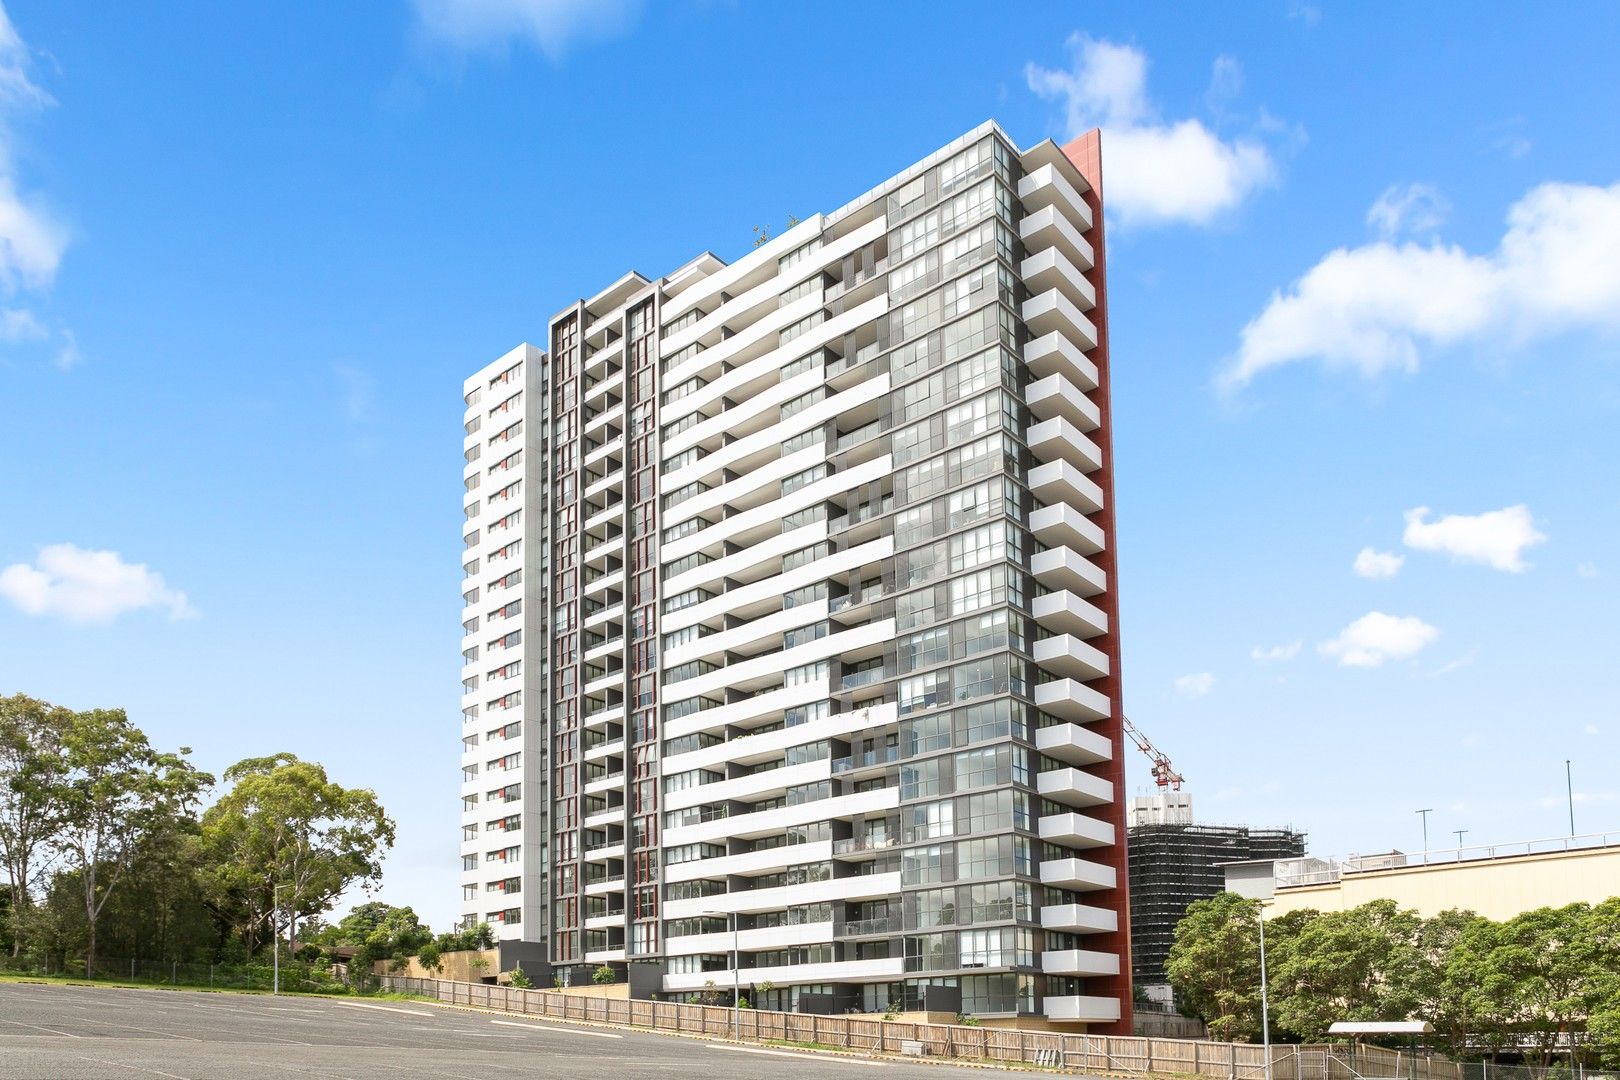 2 Bedrooms, Apartment, For Rent, Gay Street, Fifth Floor, 2 Bathrooms, Listing ID 1597, Castle Hill, NSW, Australia, 2154,